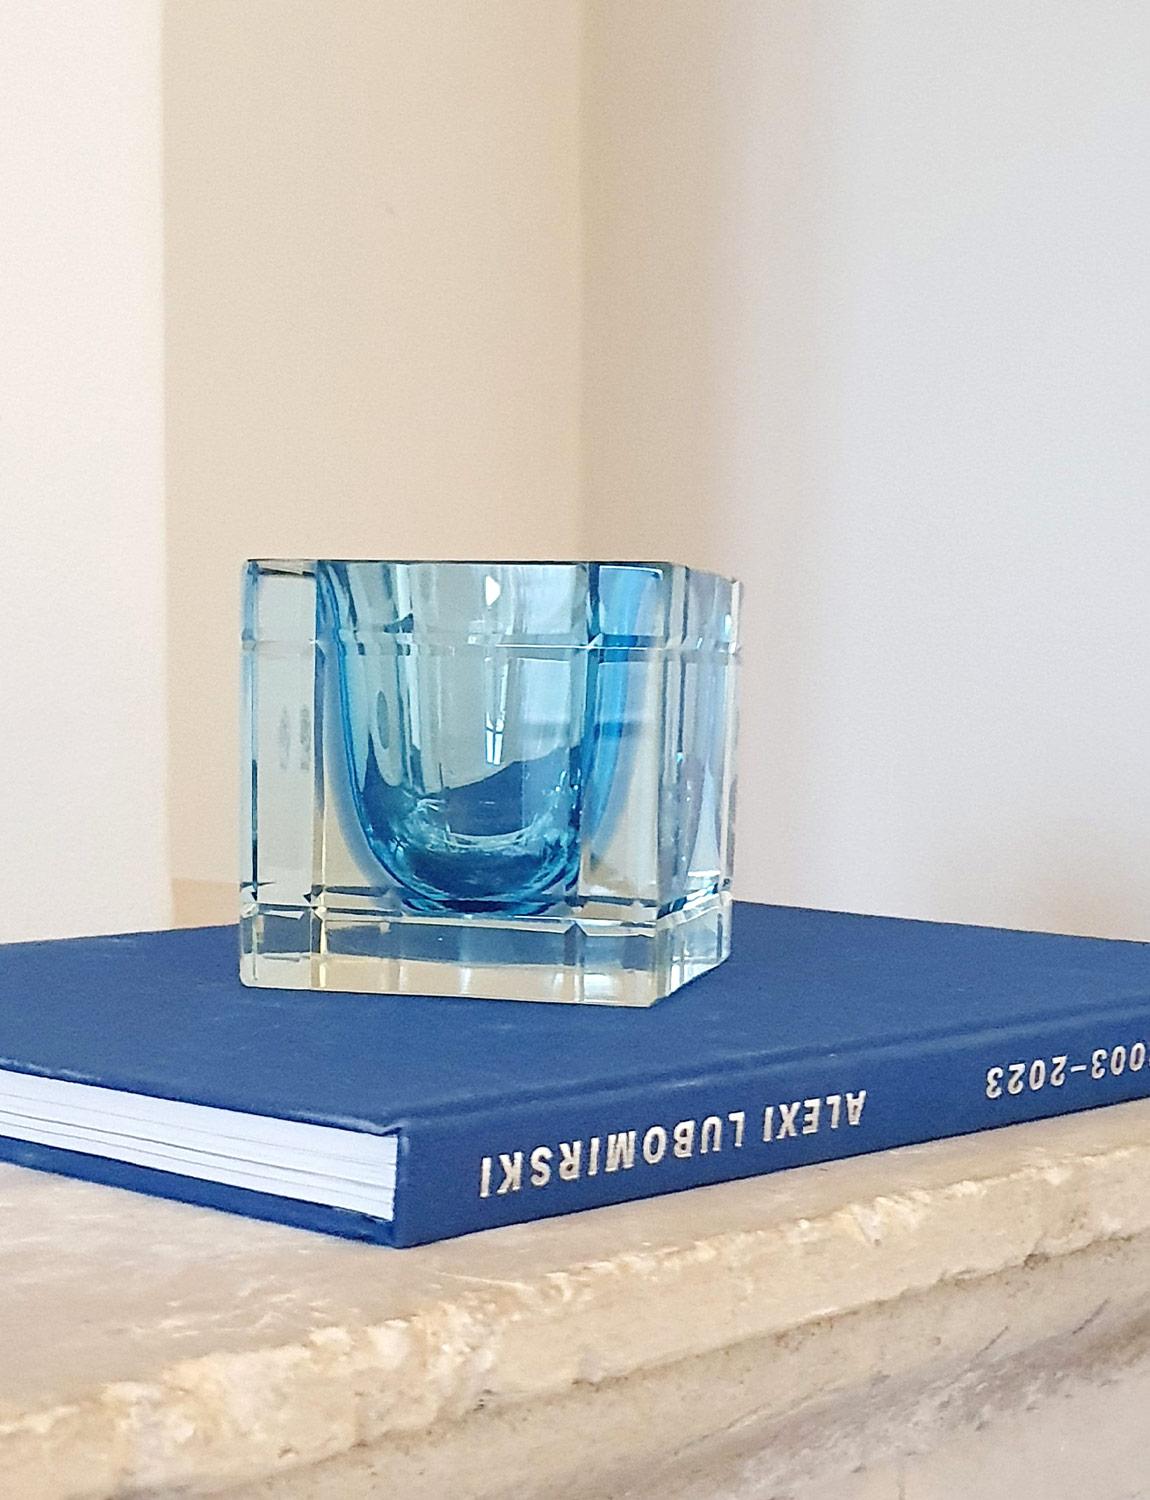 A 1970s Pale blue sommerso (submerged) glass bowl in a cube shape. The cube has decorative ridges on the side and the piece still has its original sticker. Excellent condition.